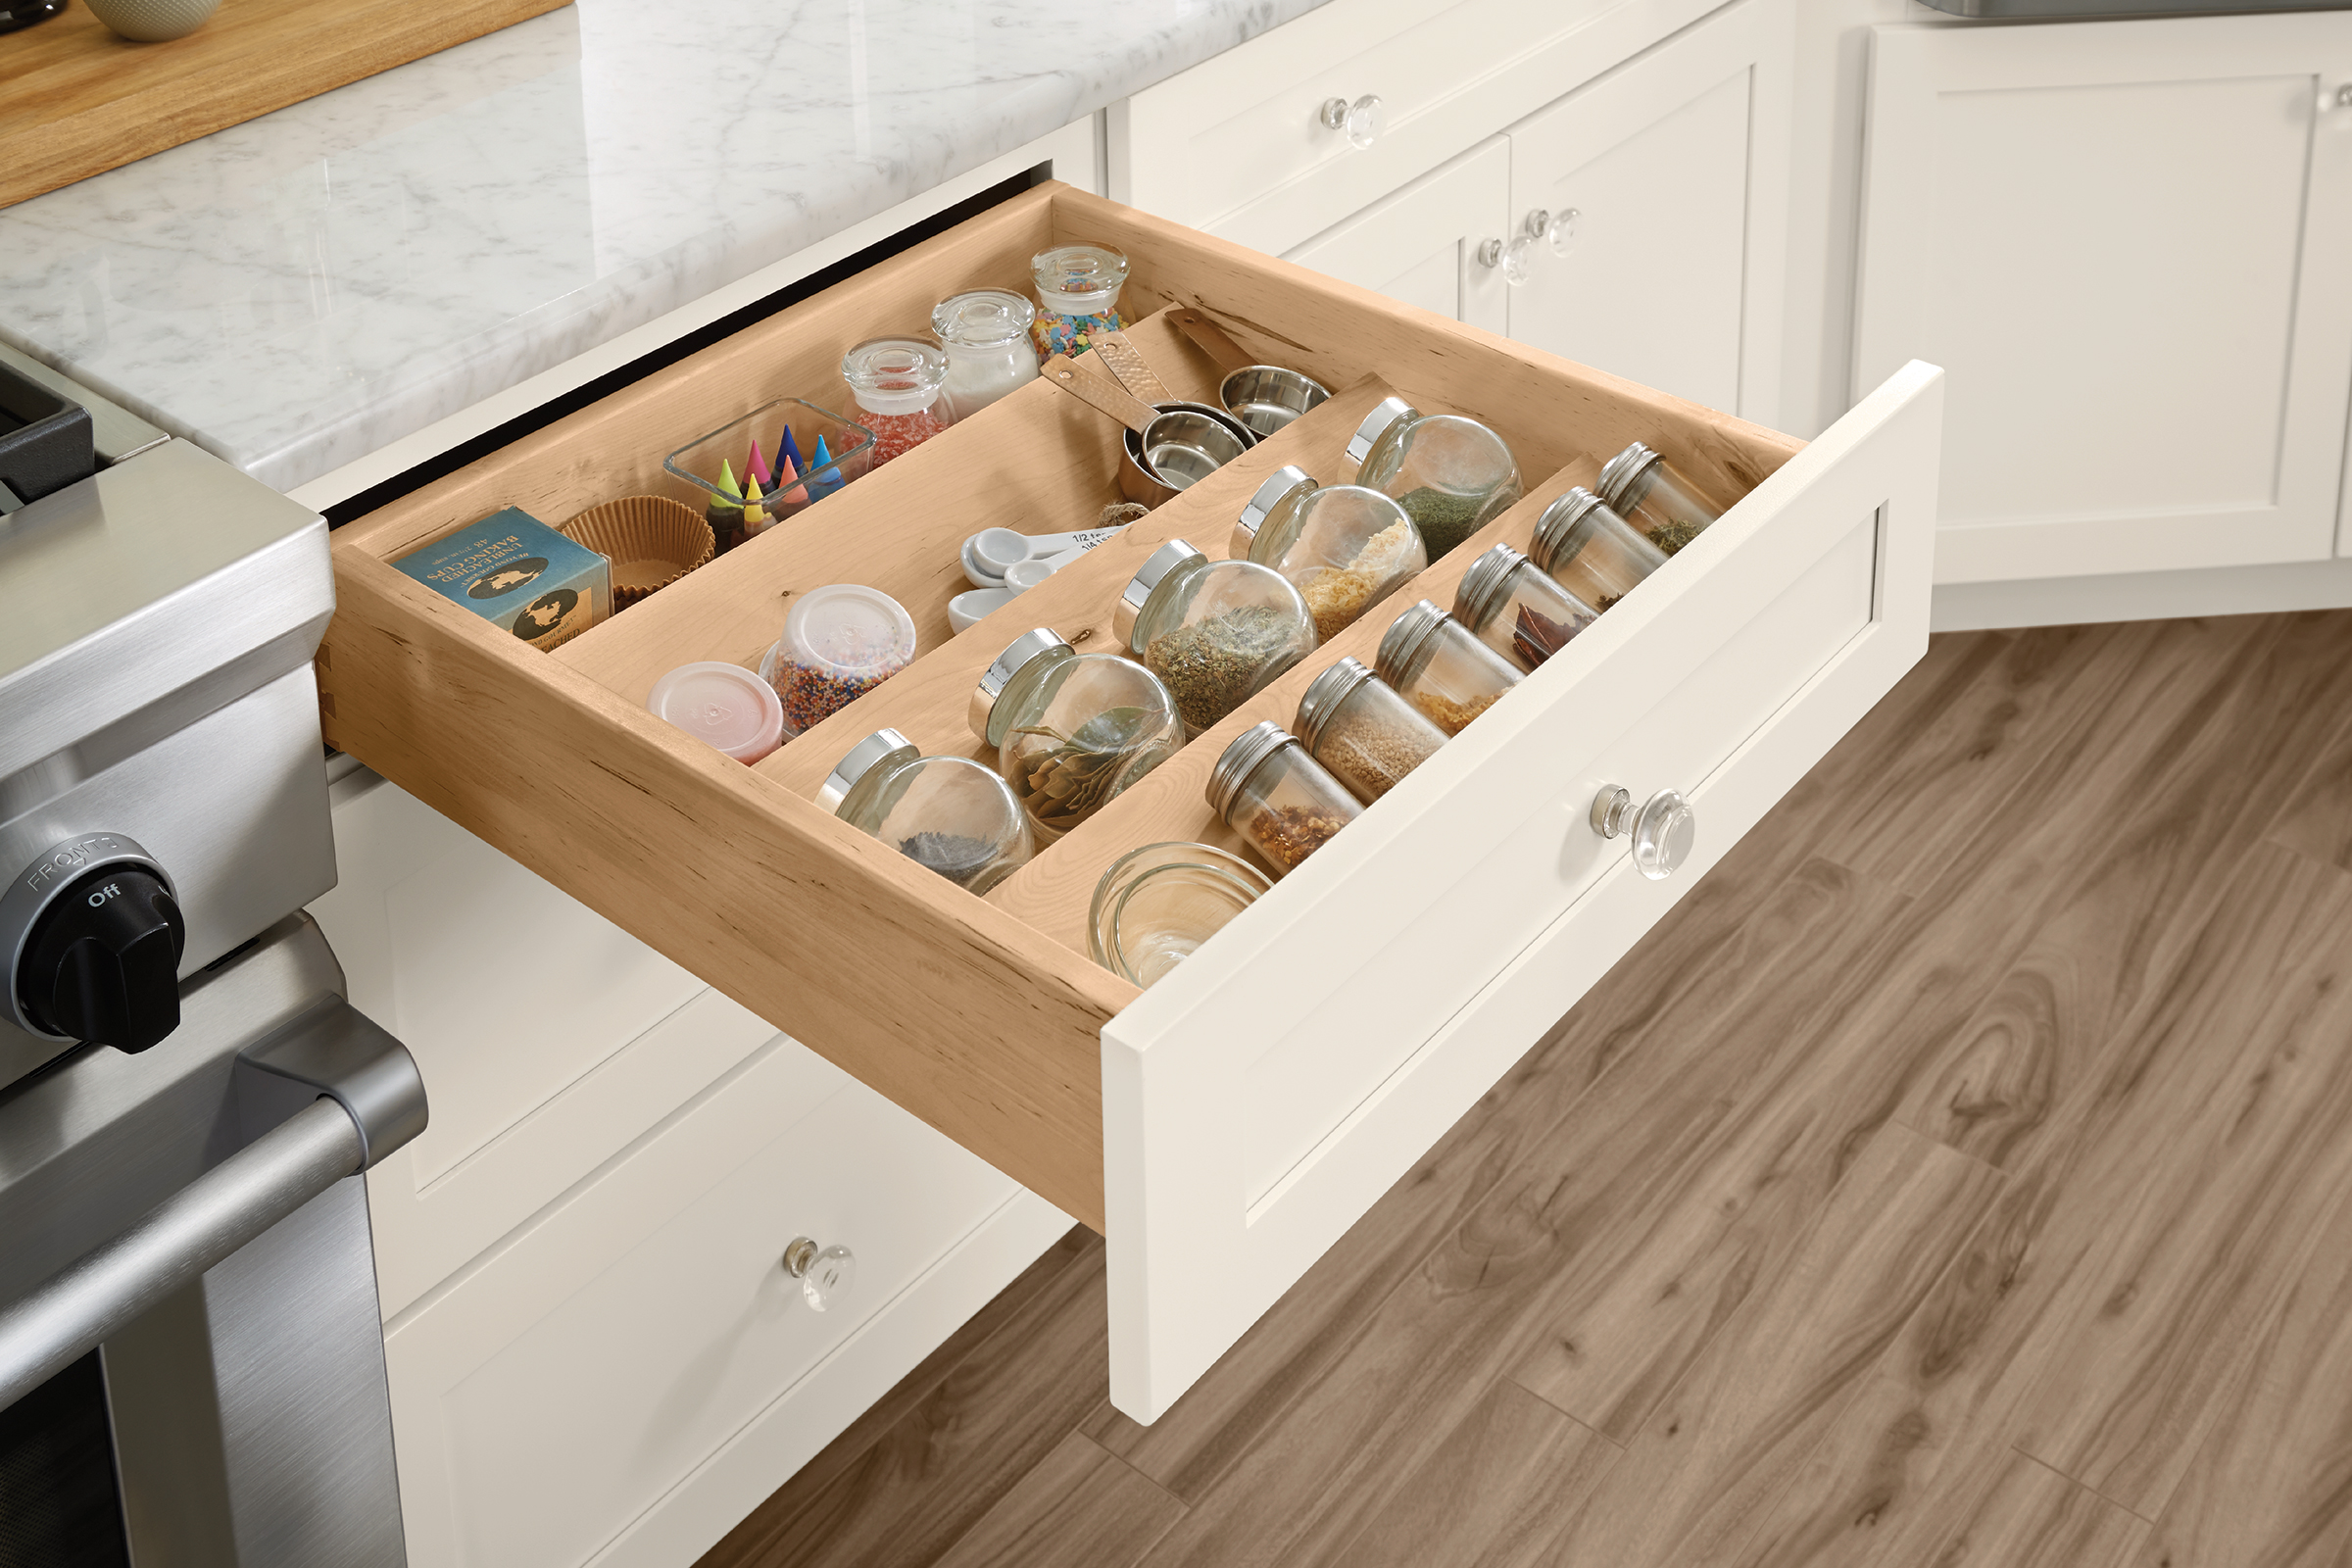 KraftMaid base cabinet with top drawer opened to reveal organized kitchen drawer spice rack insert for storage